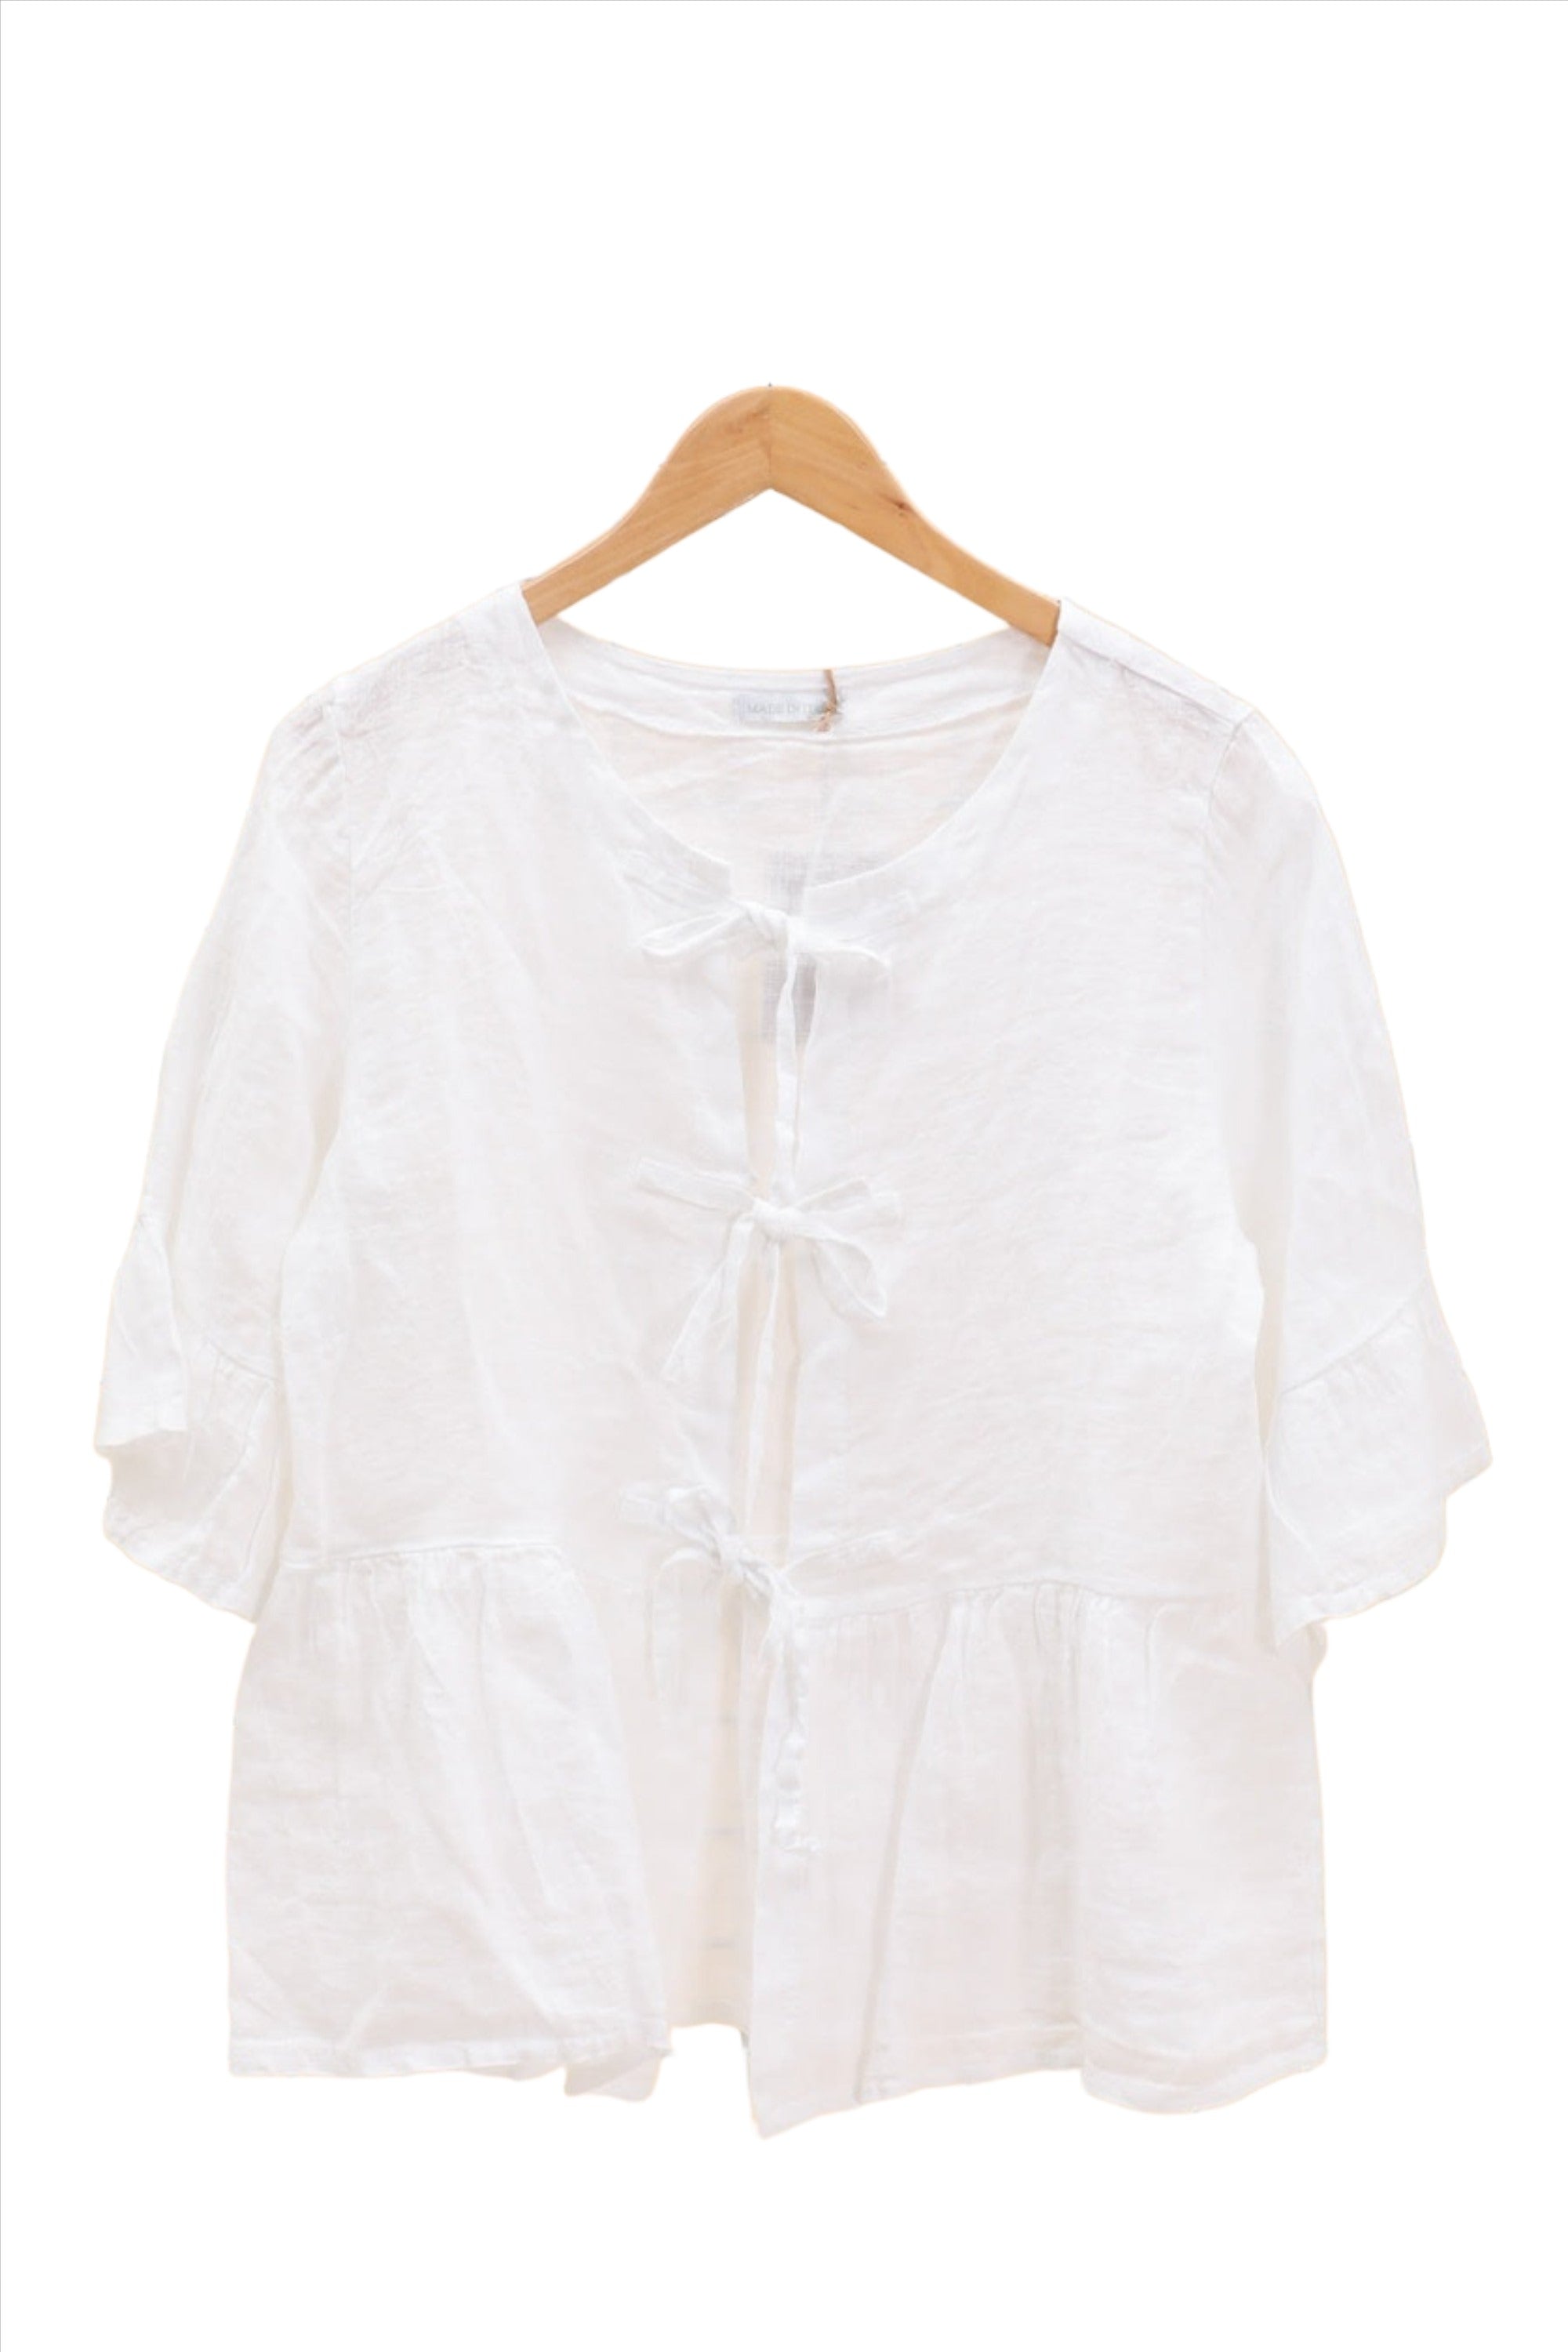 Clever Alice Tie up Bow Linen Overshirt 